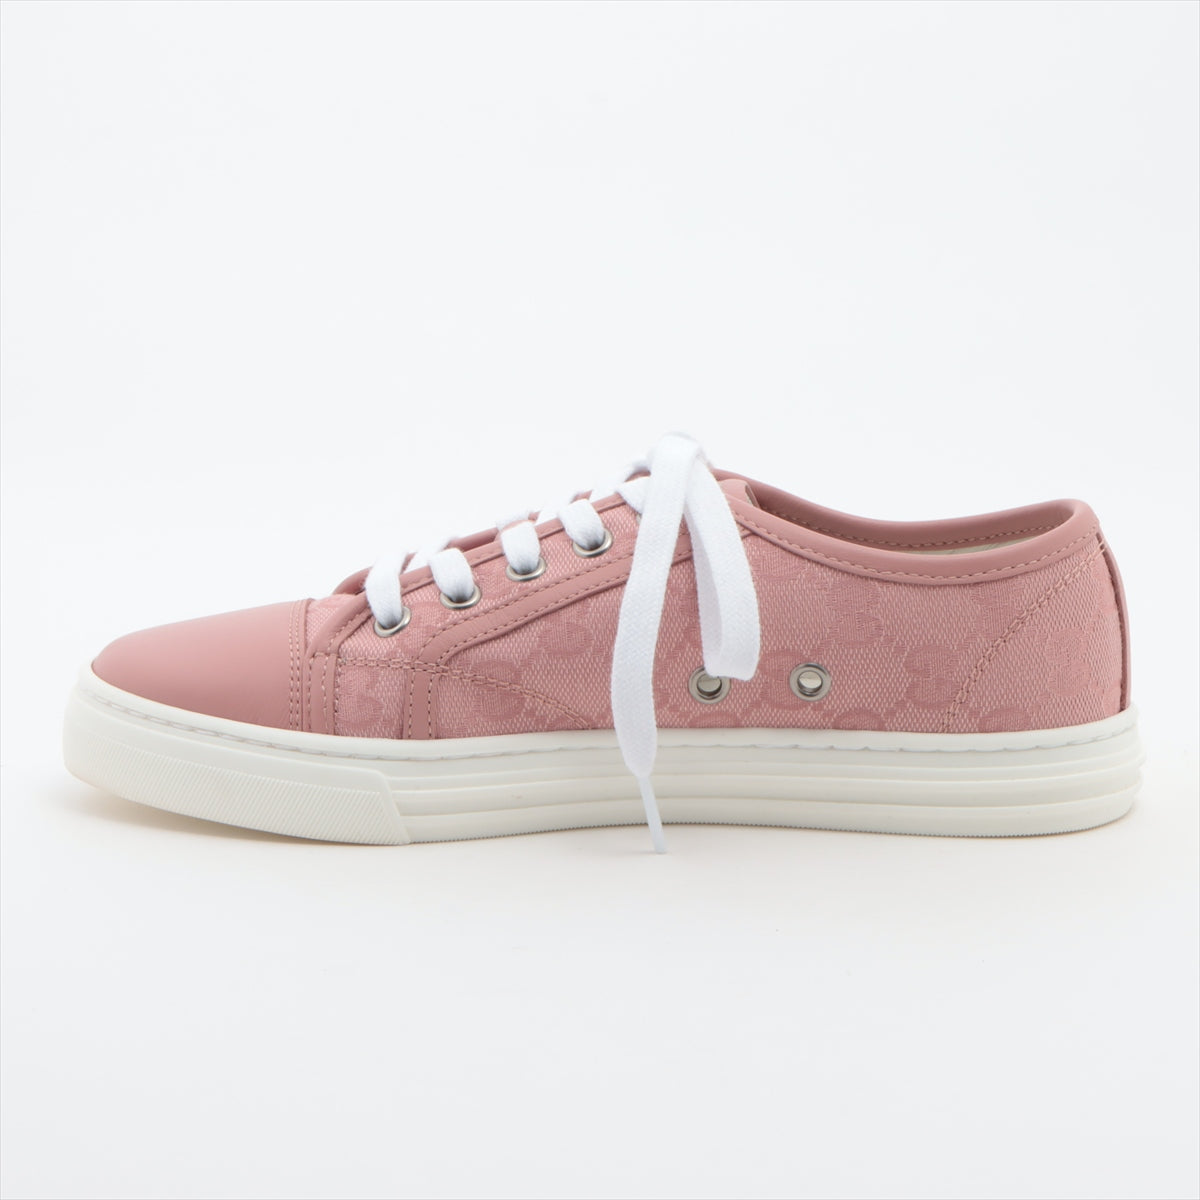 Gucci GG Canvas Canvas & Leather Sneakers 35 Ladies' Pink 426187 Replacement Laces Included